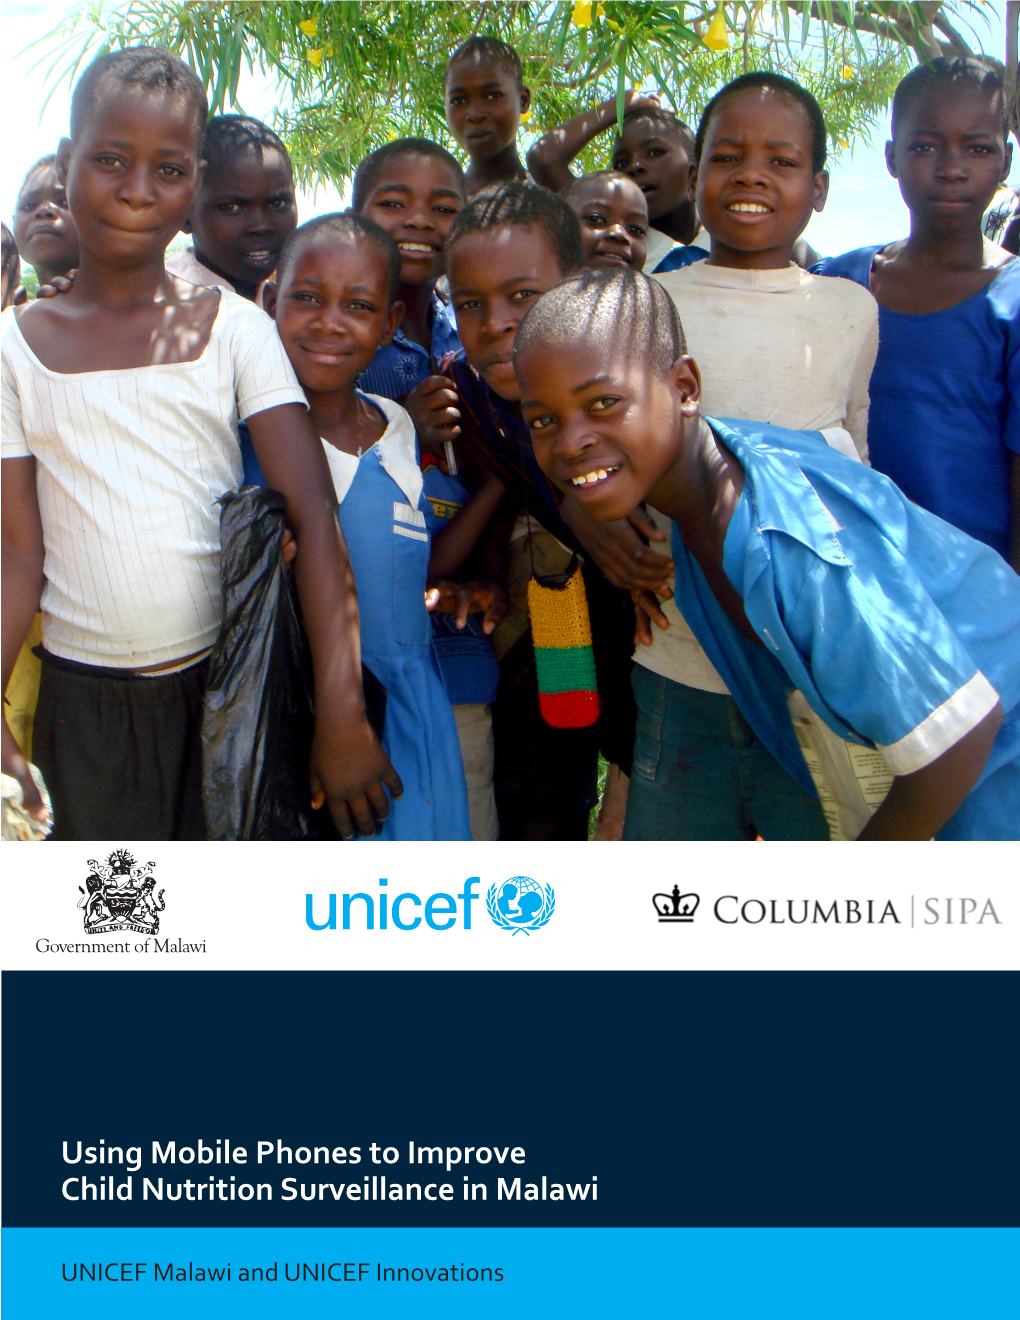 Using Mobile Phones to Improve Child Nutrition Surveillance in Malawi